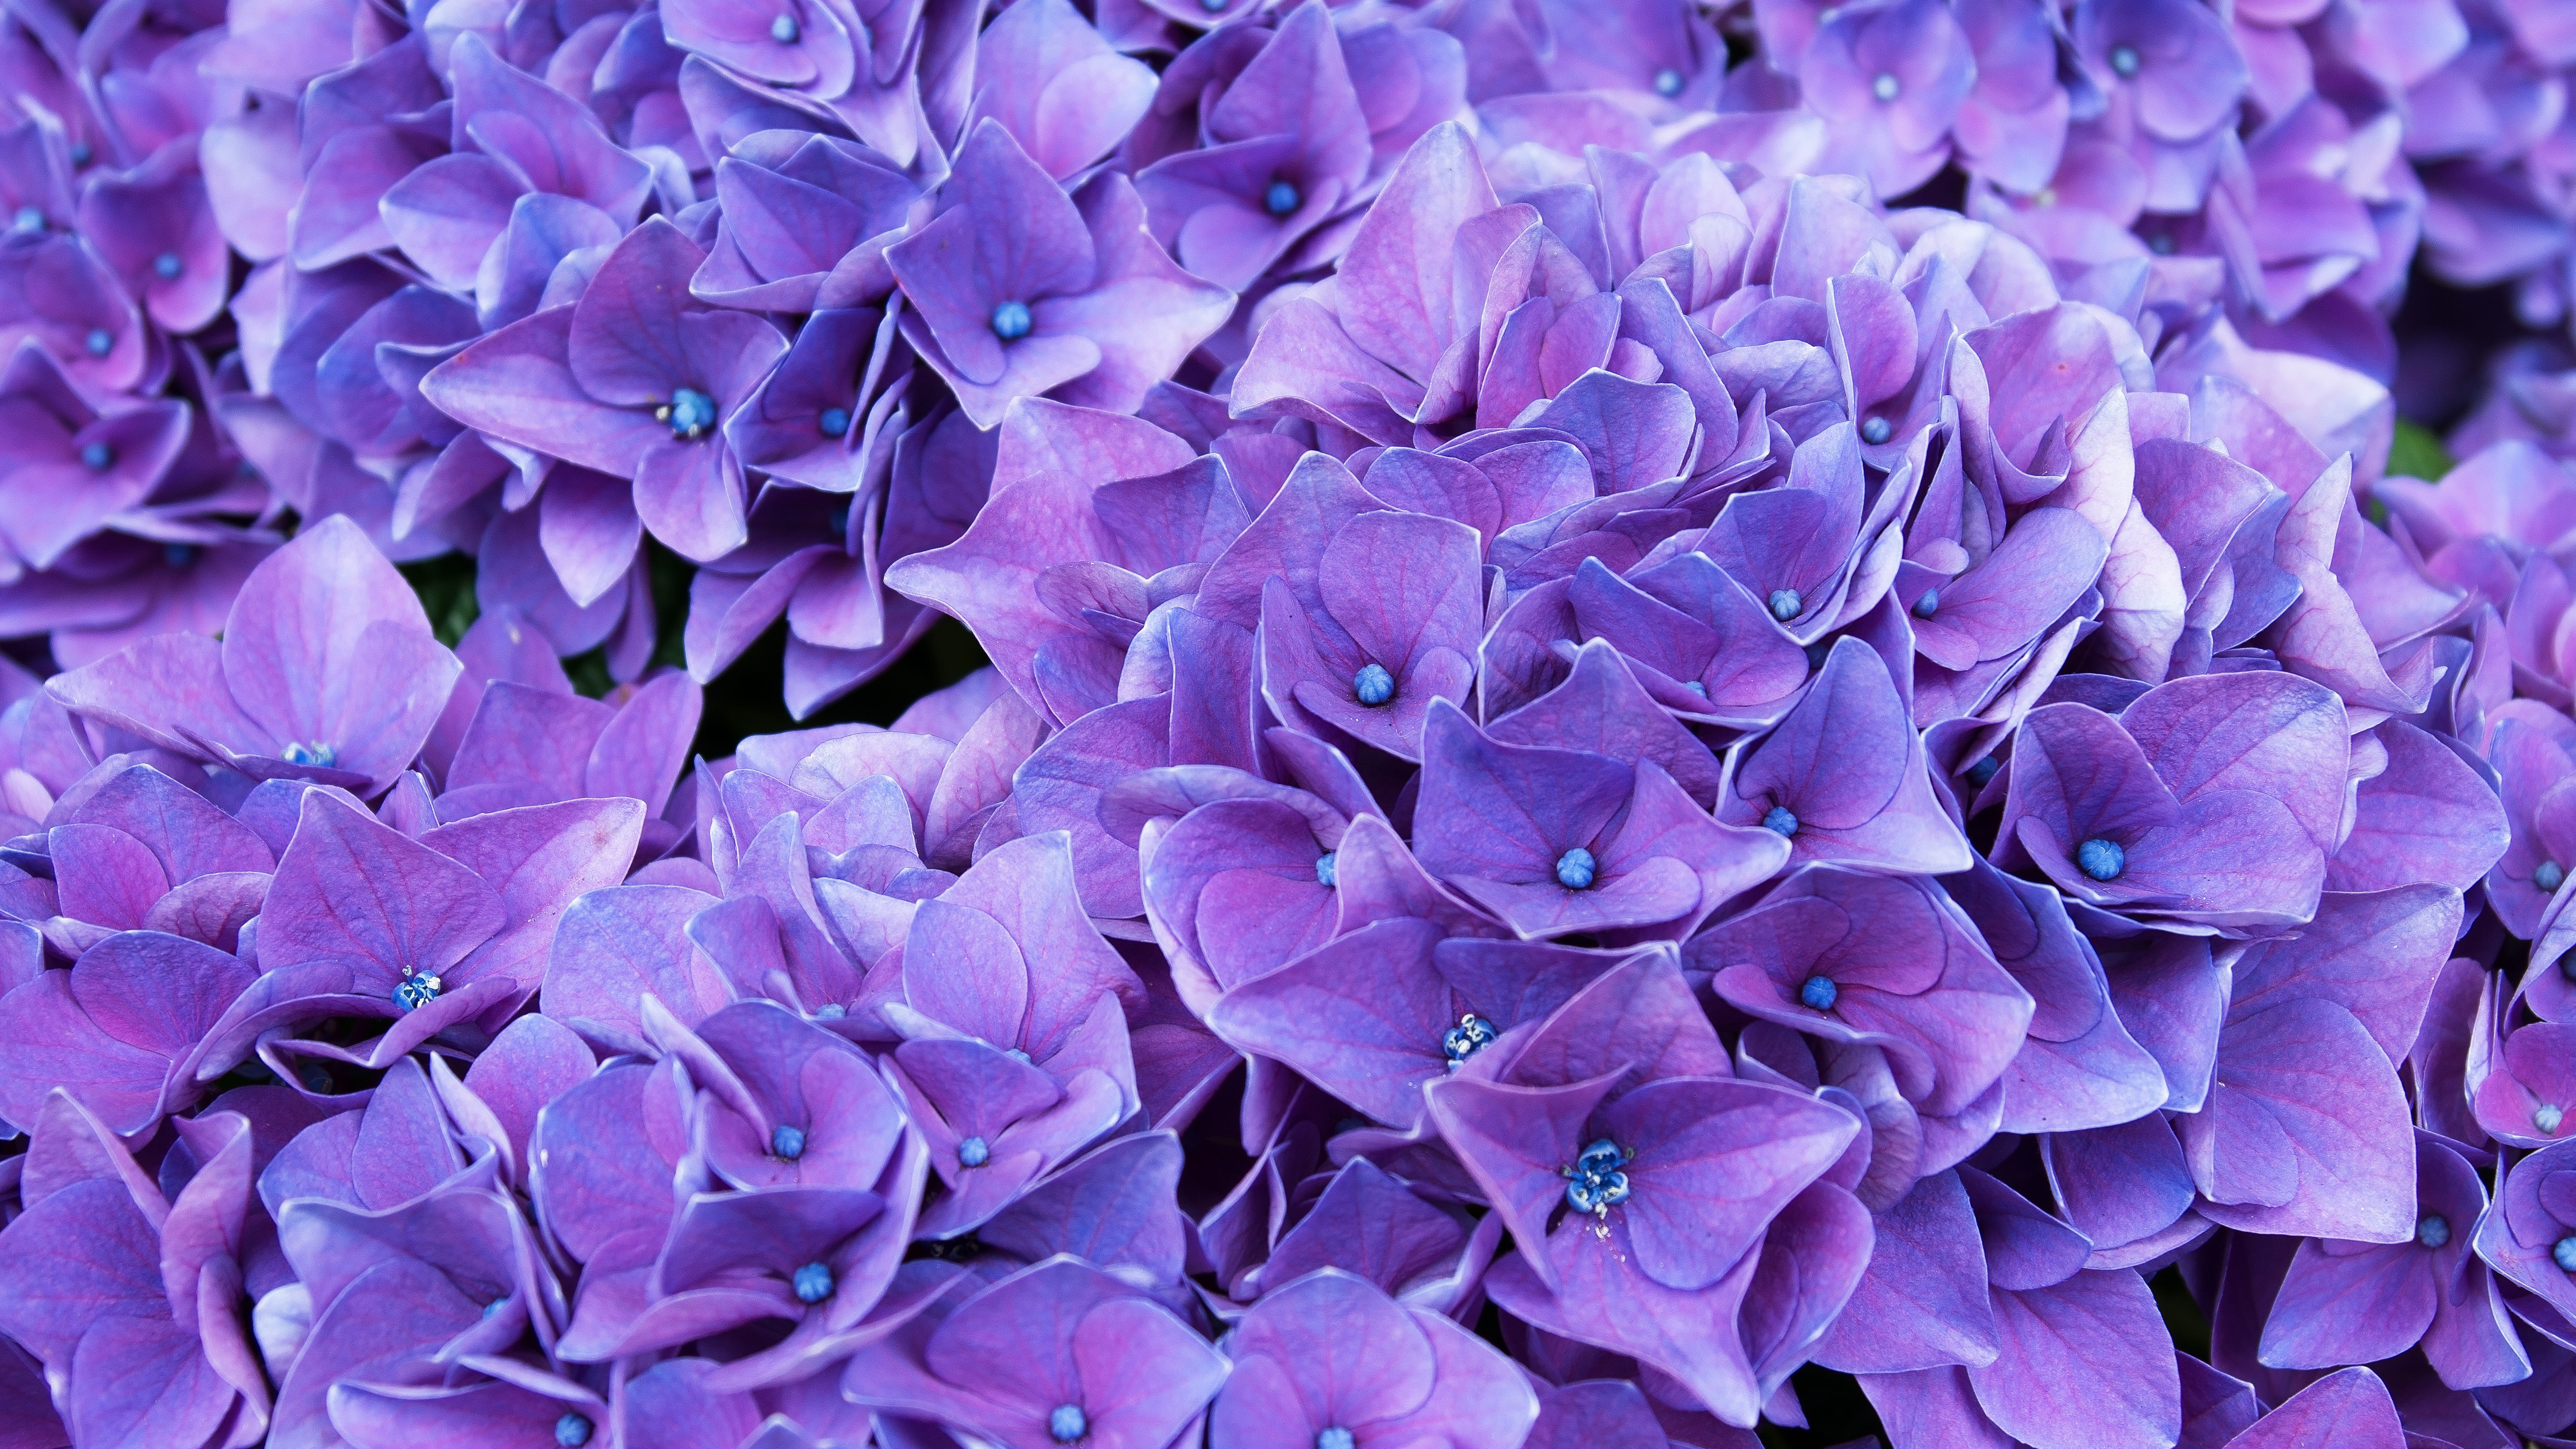 General 6000x3375 violet lilac flowers closeup depth of field nature